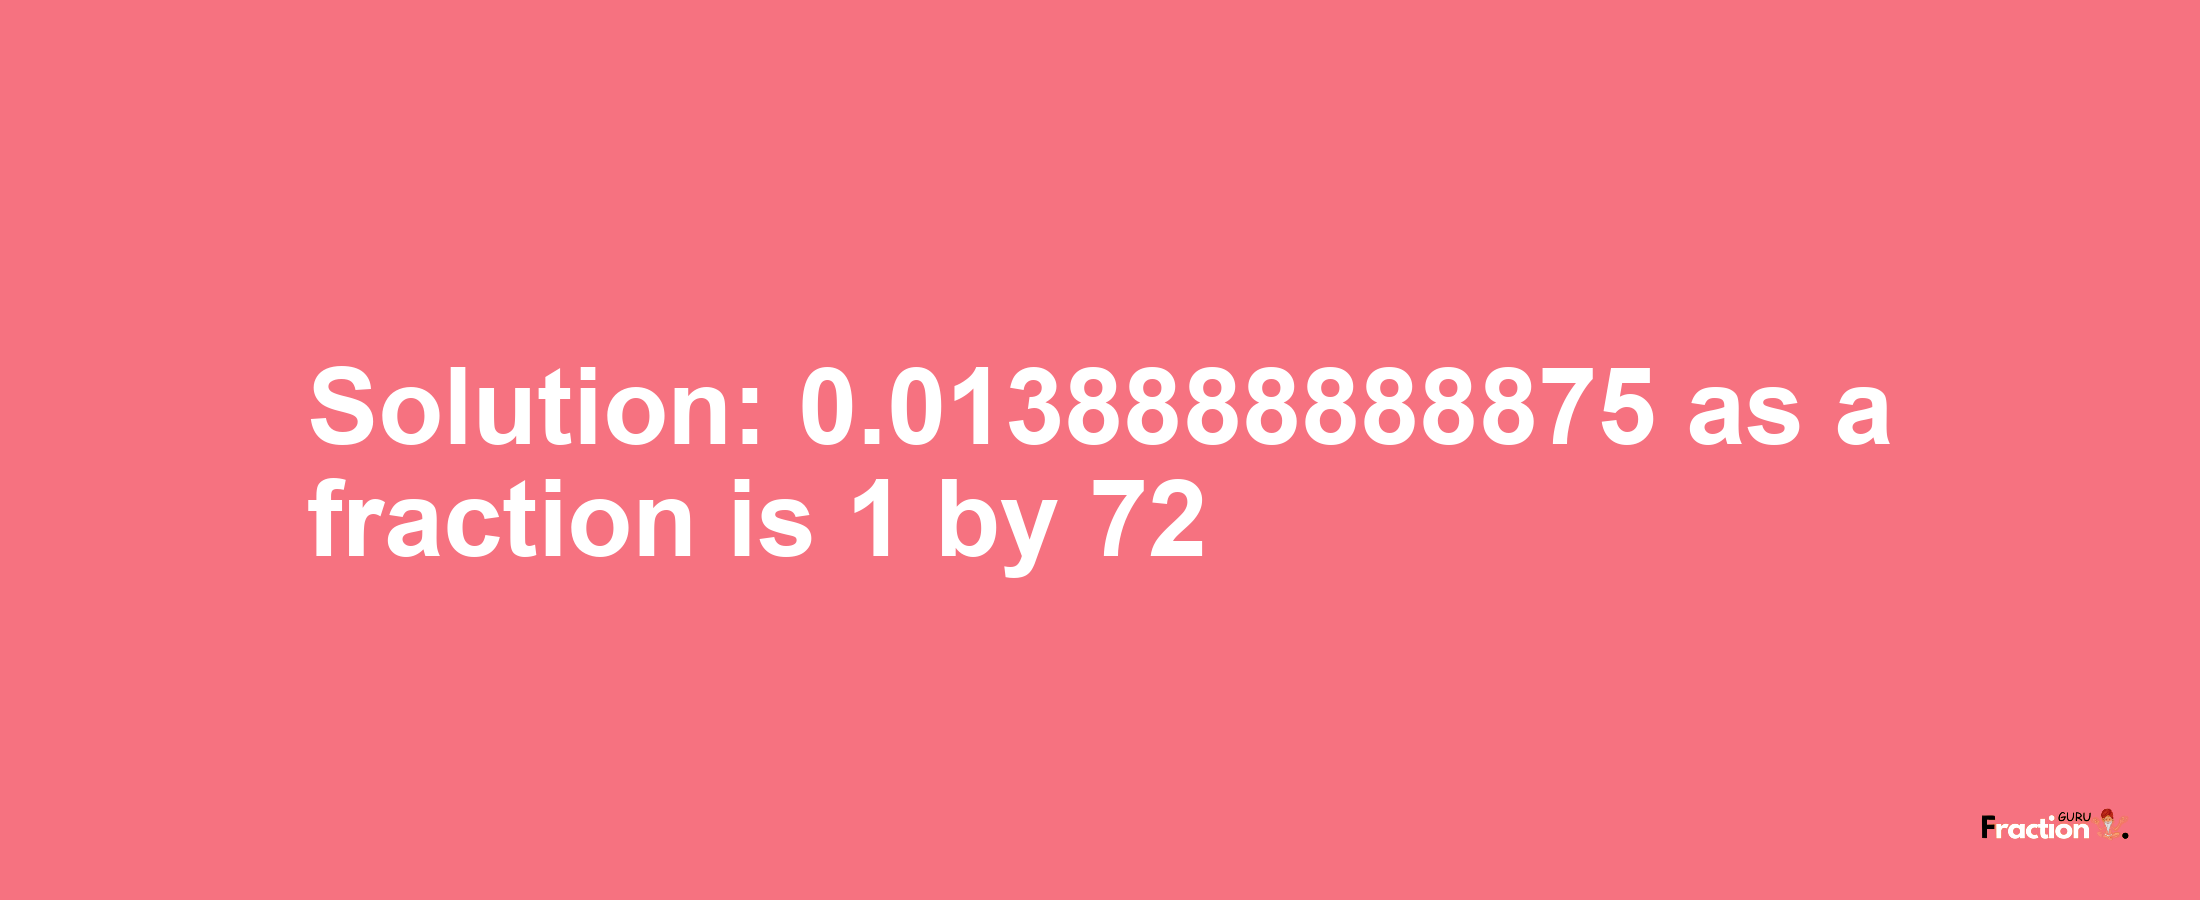 Solution:0.0138888888875 as a fraction is 1/72